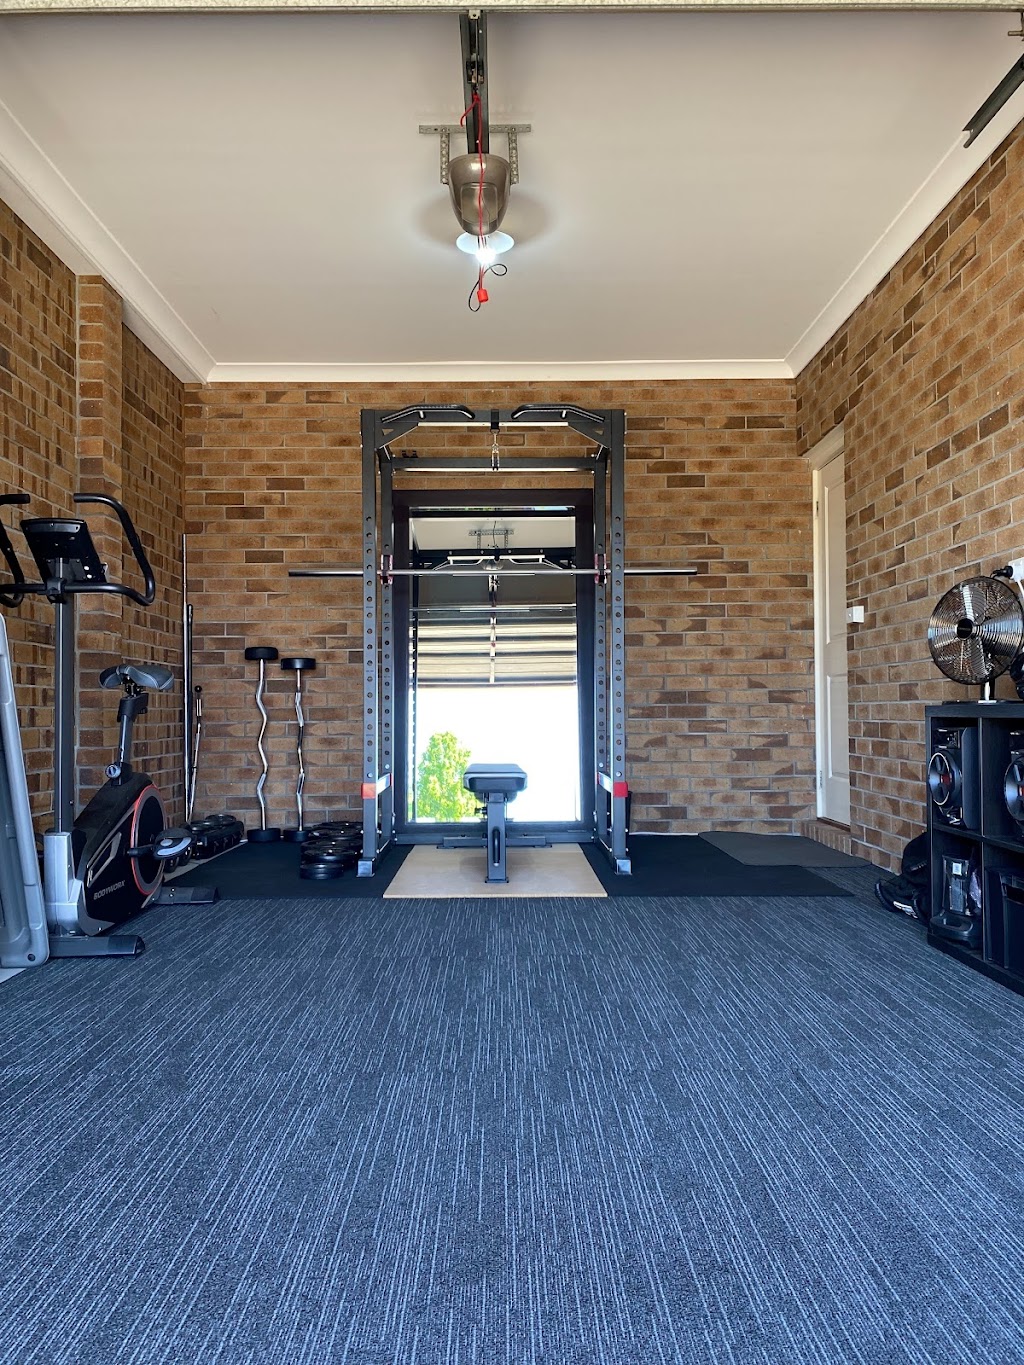 Body Built Personal Training | health | 35 Chanticleer Ave, Melton West VIC 3337, Australia | 0481233420 OR +61 481 233 420